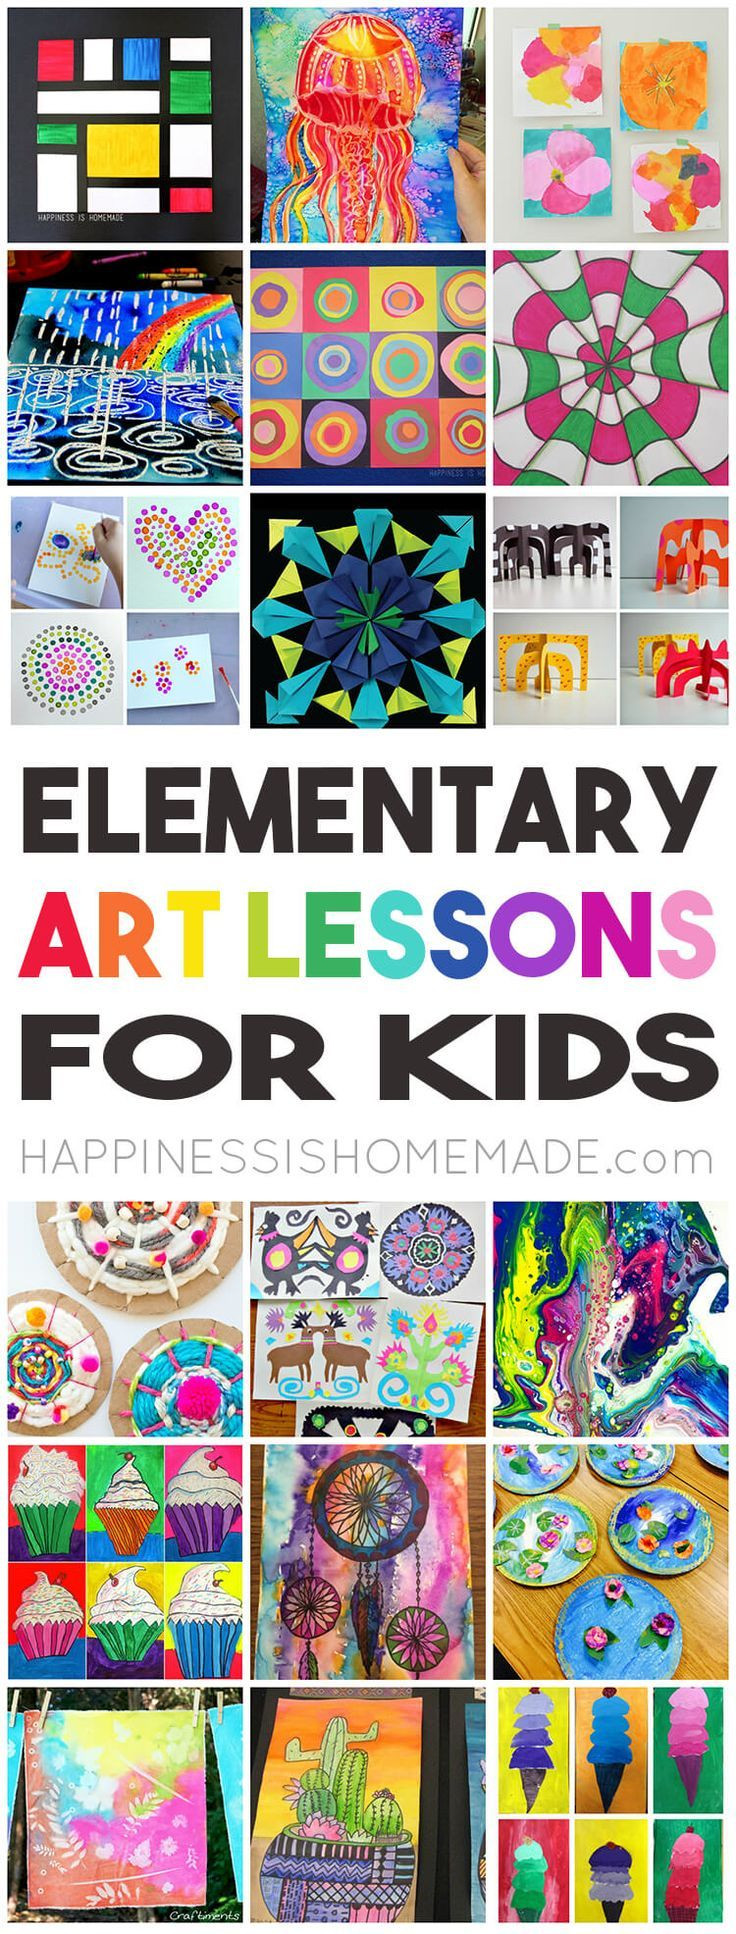 Art Class Ideas For Kids
 36 Elementary Art Lessons for Kids one for every week of